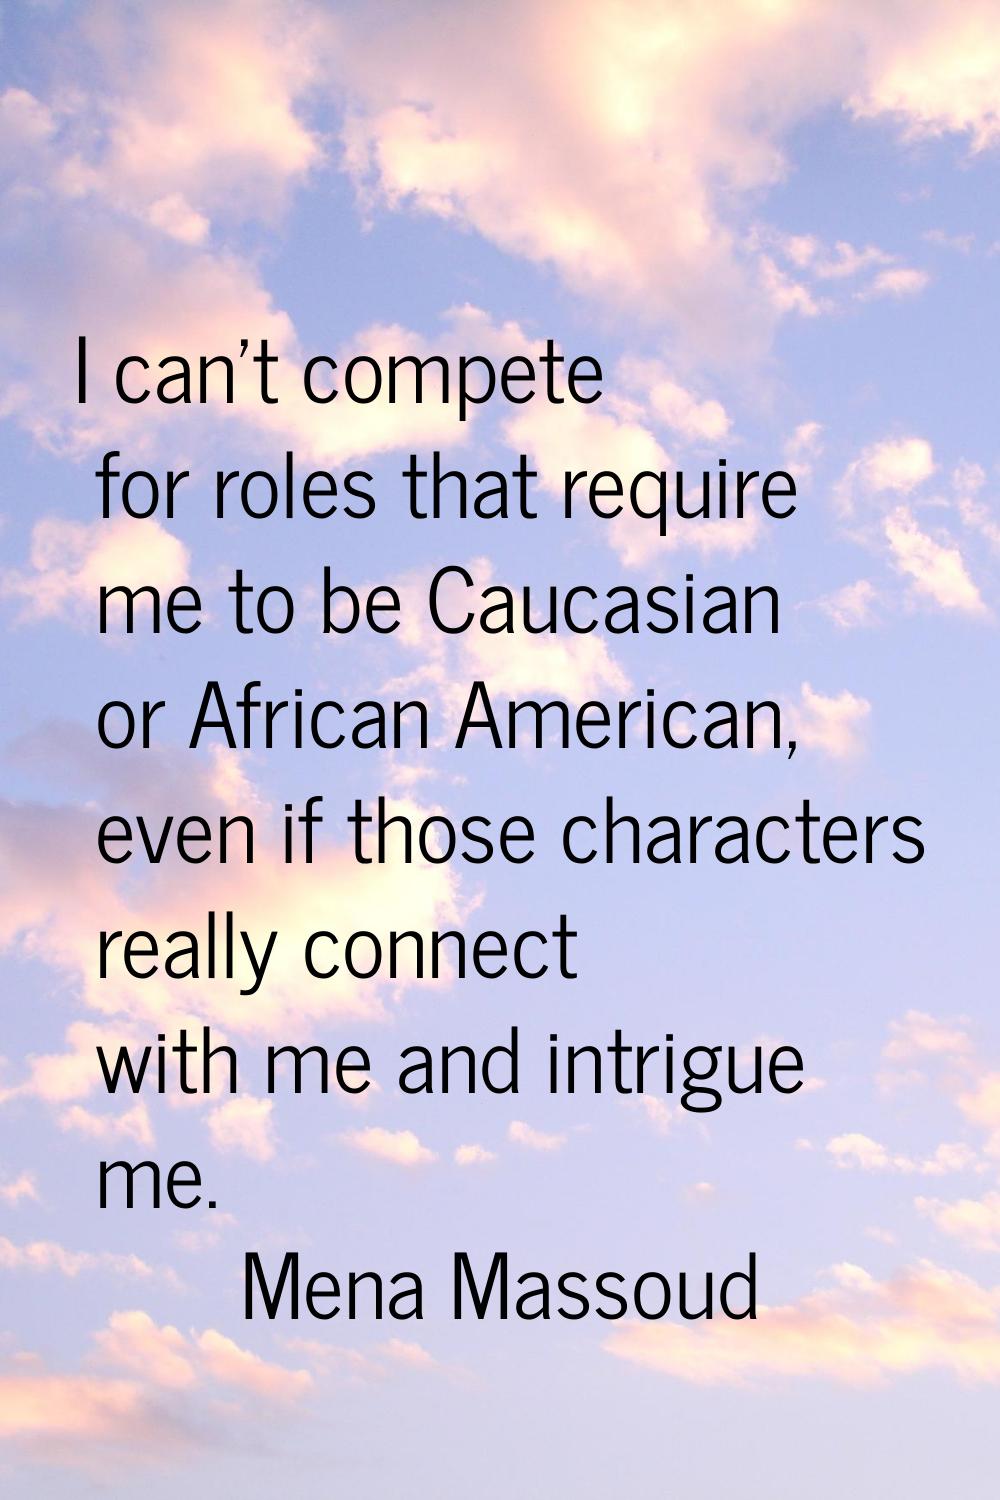 I can't compete for roles that require me to be Caucasian or African American, even if those charac